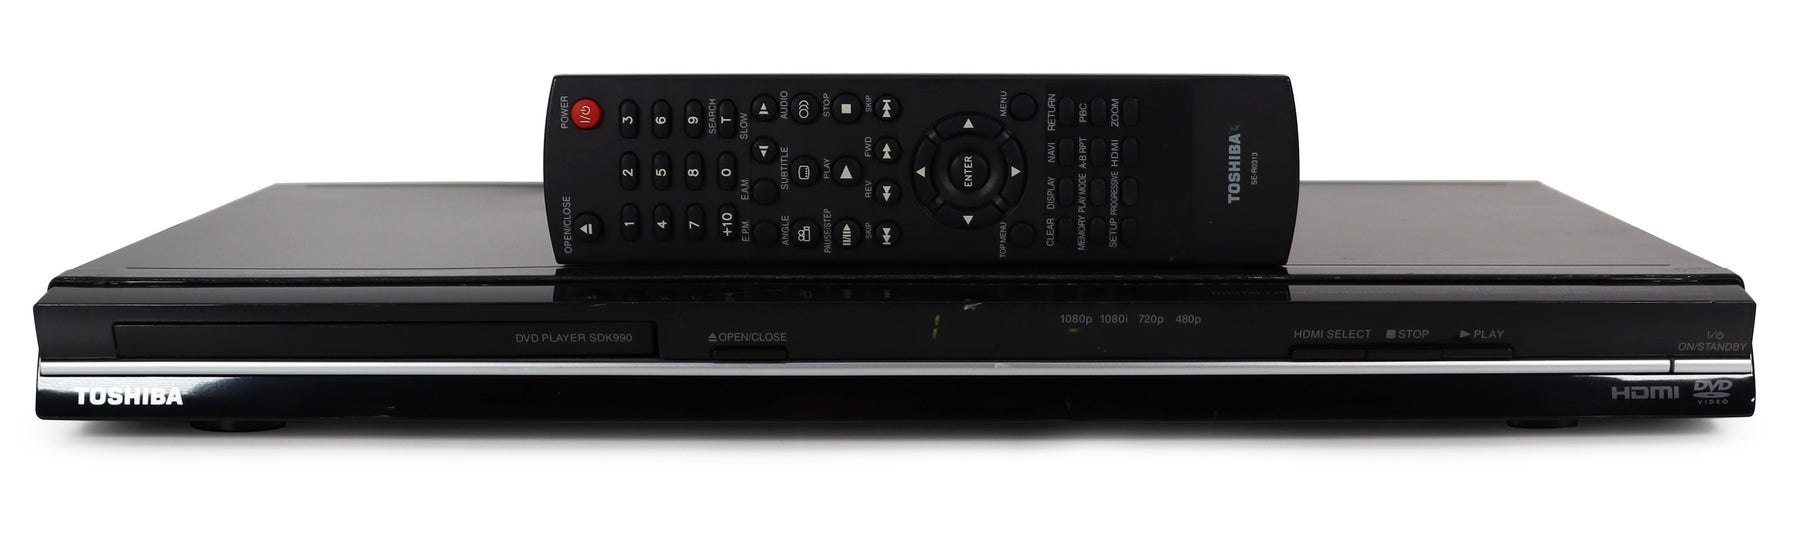 Top 10 Best DVD Players to Buy in 2021